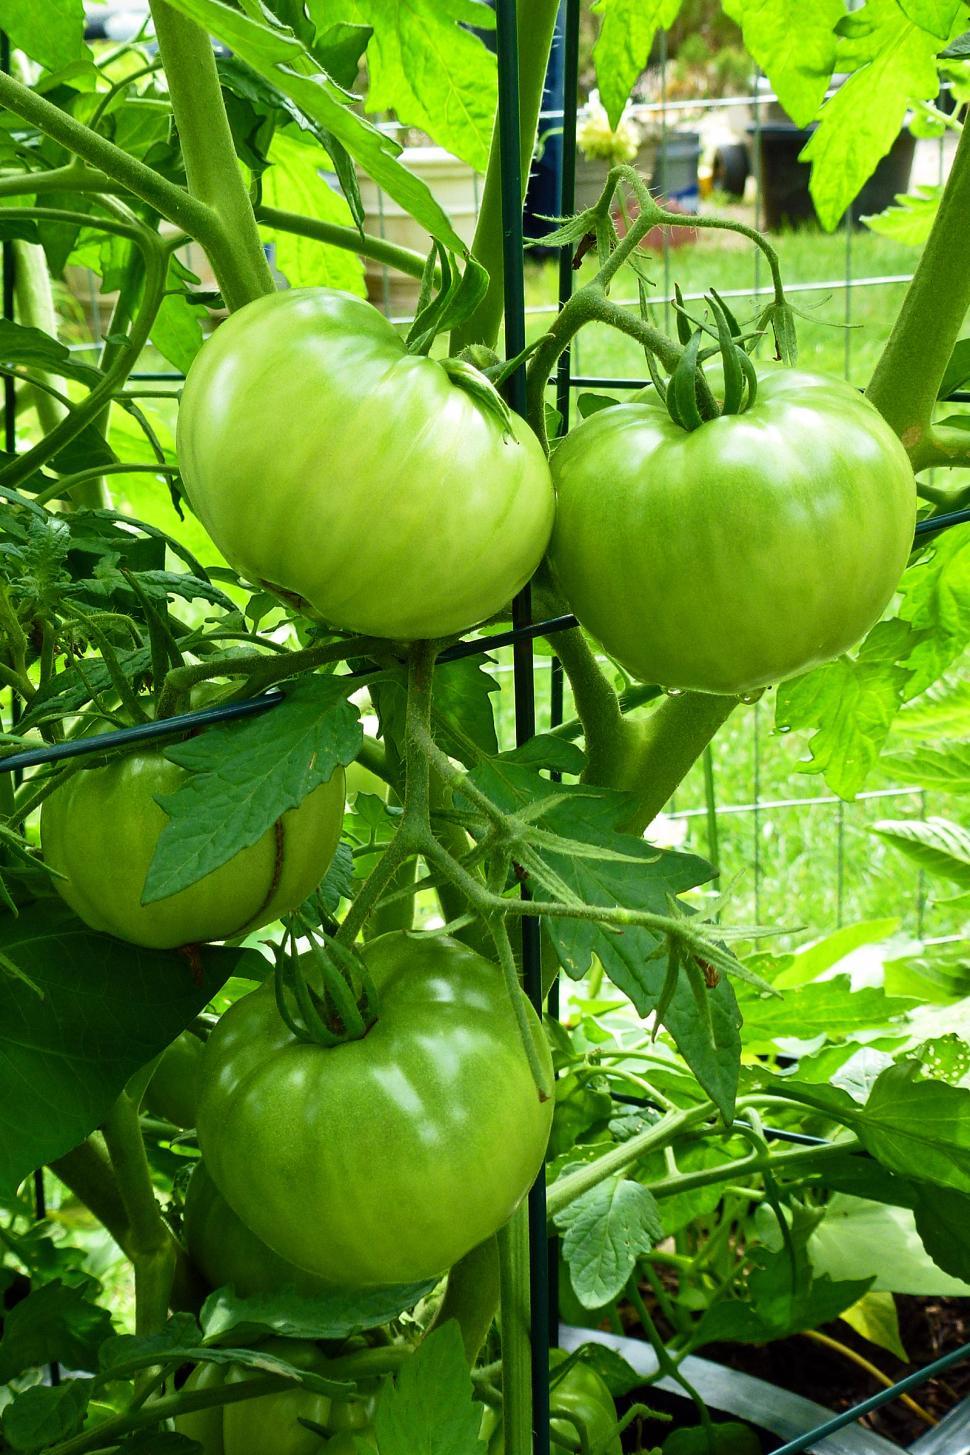 Free Image of Tomatoes on the Vine 